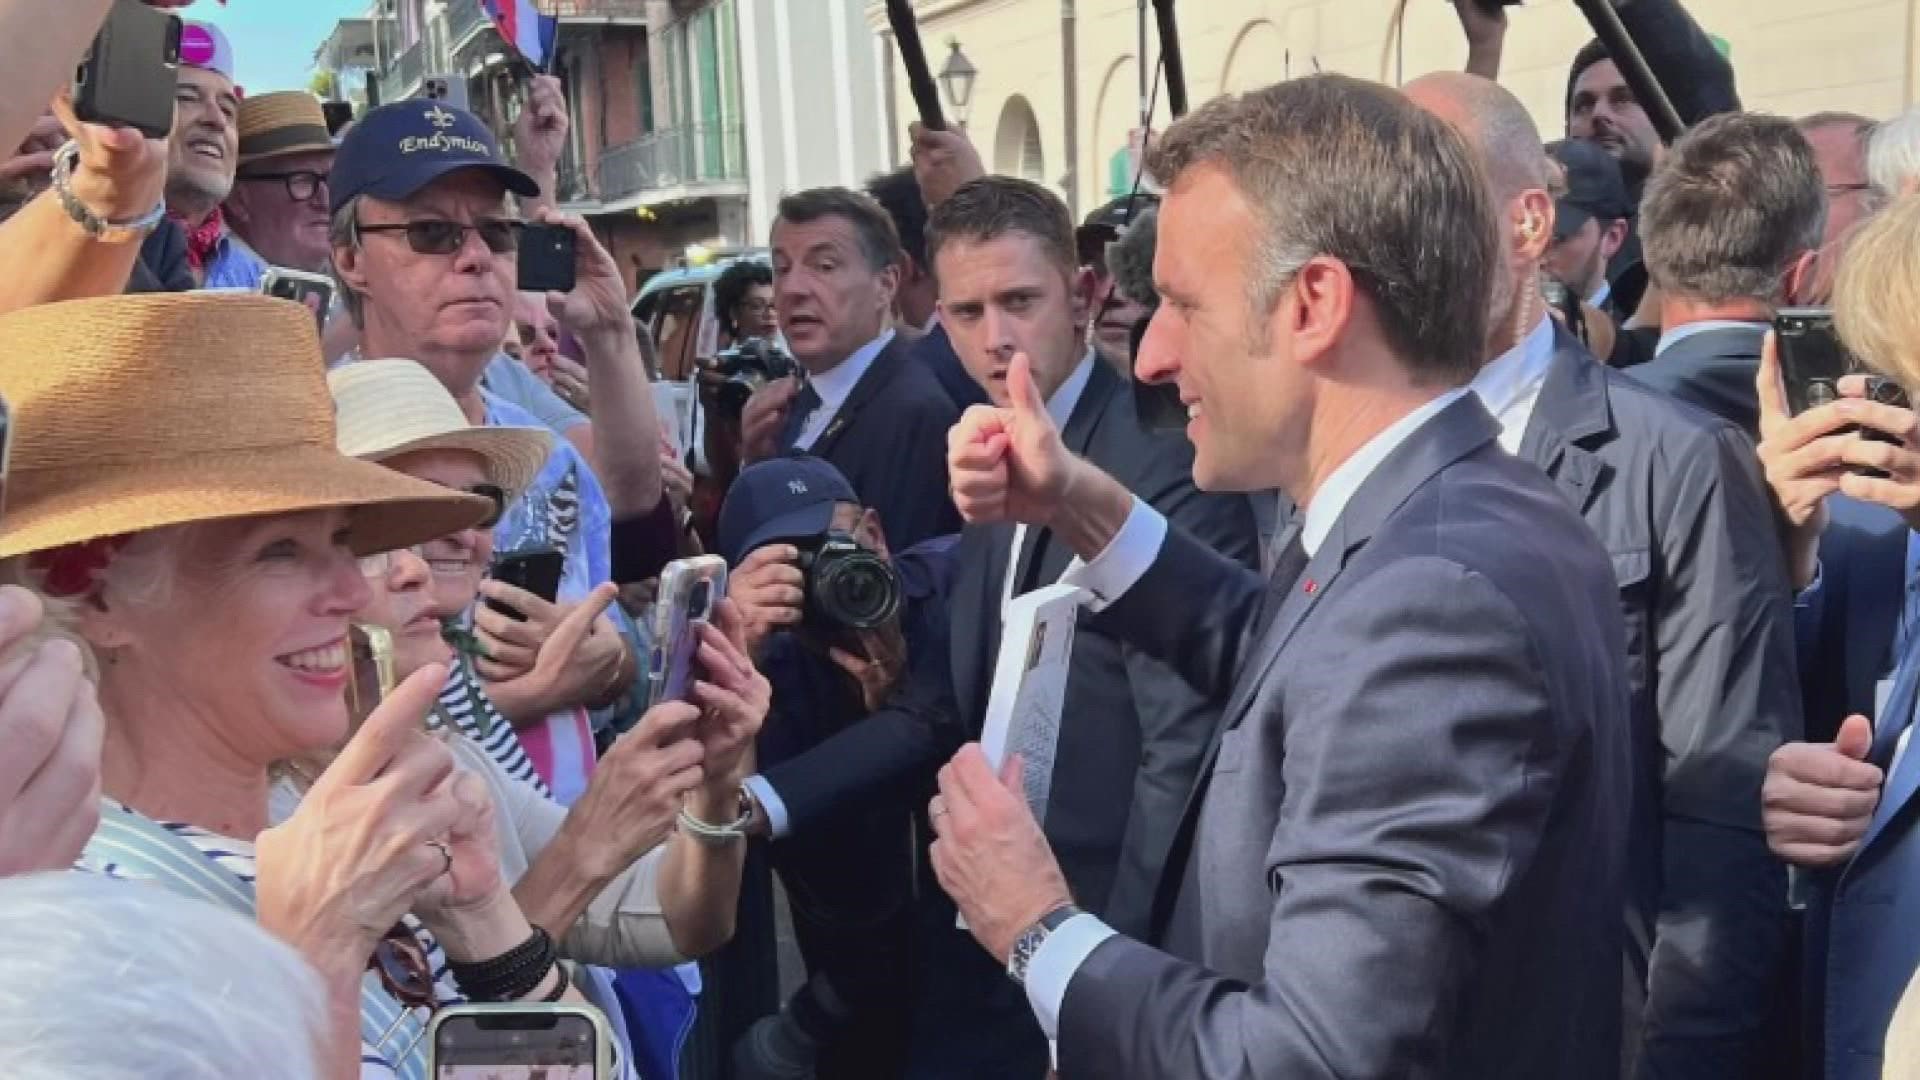 President Macron took extra time to stop and greet most of the people who lined the streets as he walked by.